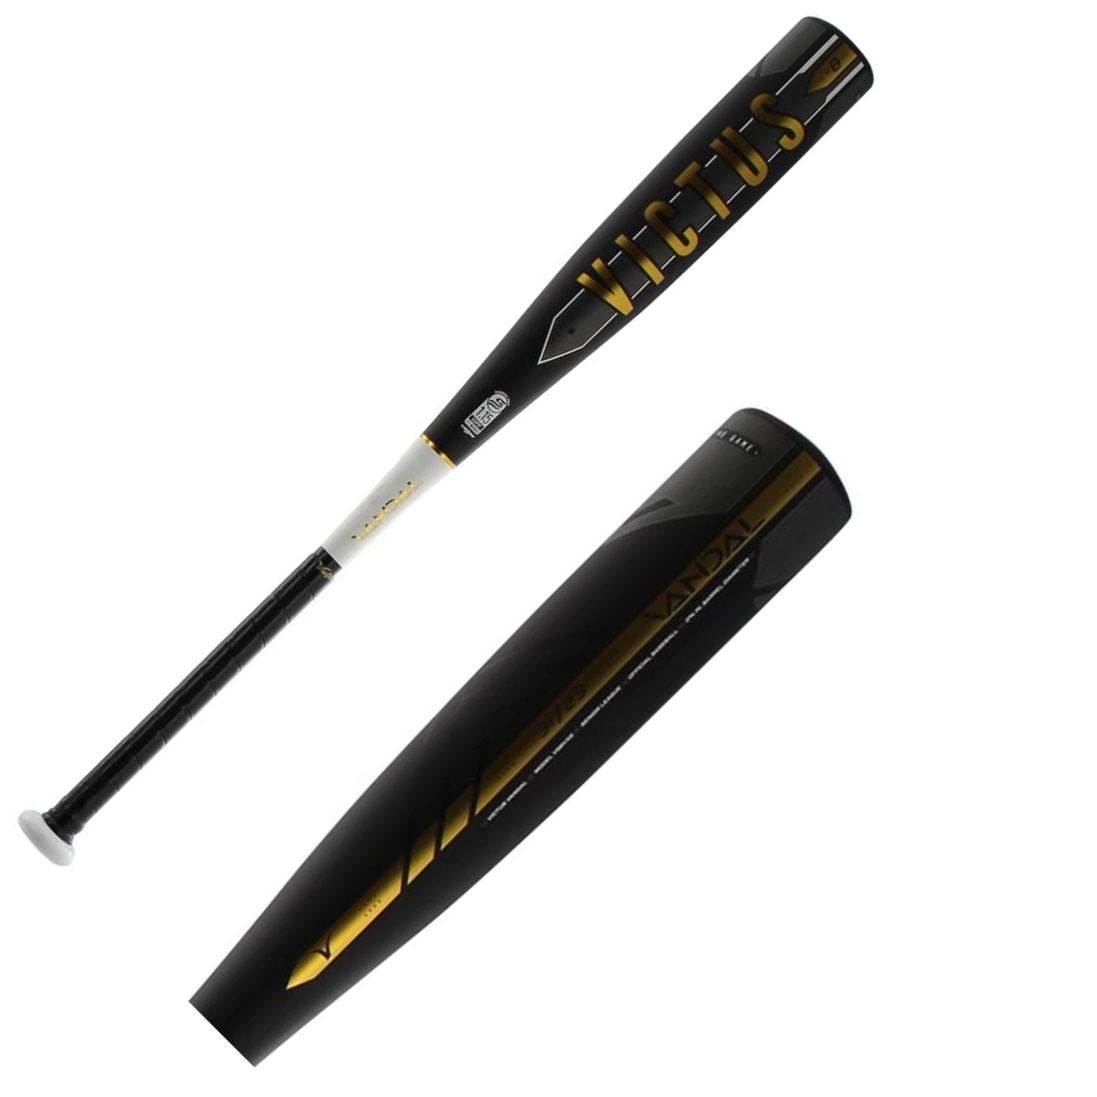 victus-vandal-8-usssa-baseball-bat-30-inch-22-oz VSBVX8-3022 Victus  As a company founded majority-owned and operated by current and former